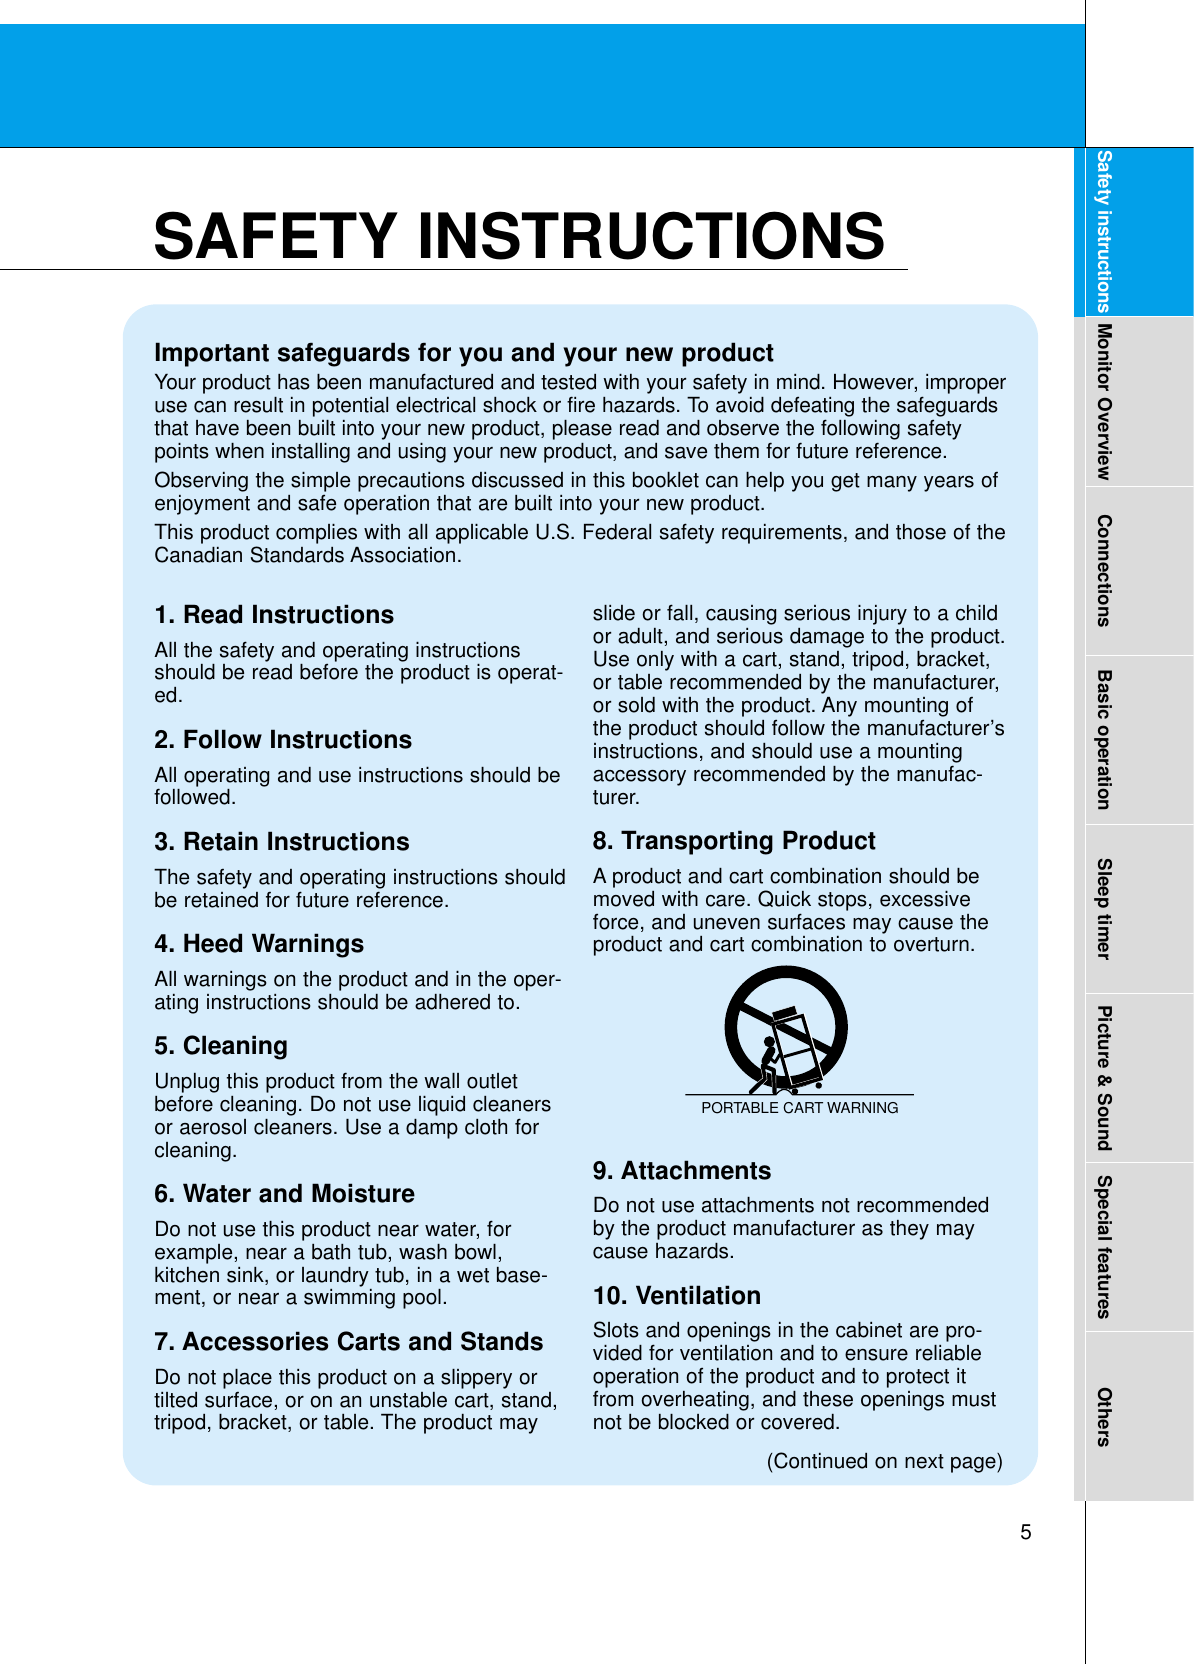 5Safety instructions Monitor Overview Connections Basic operation Sleep timer Picture &amp; Sound Special features OthersImportant safeguards for you and your new productYour product has been manufactured and tested with your safety in mind. However, improperuse can result in potential electrical shock or fire hazards. To avoid defeating the safeguardsthat have been built into your new product, please read and observe the following safetypoints when installing and using your new product, and save them for future reference.Observing the simple precautions discussed in this booklet can help you get many years ofenjoyment and safe operation that are built into your new product.This product complies with all applicable U.S. Federal safety requirements, and those of theCanadian Standards Association.1. Read InstructionsAll the safety and operating instructionsshould be read before the product is operat-ed.2. Follow InstructionsAll operating and use instructions should befollowed.3. Retain InstructionsThe safety and operating instructions shouldbe retained for future reference.4. Heed WarningsAll warnings on the product and in the oper-ating instructions should be adhered to.5. CleaningUnplug this product from the wall outletbefore cleaning. Do not use liquid cleanersor aerosol cleaners. Use a damp cloth forcleaning.6. Water and MoistureDo not use this product near water, forexample, near a bath tub, wash bowl,kitchen sink, or laundry tub, in a wet base-ment, or near a swimming pool.7. Accessories Carts and StandsDo not place this product on a slippery ortilted surface, or on an unstable cart, stand,tripod, bracket, or table. The product mayslide or fall, causing serious injury to a childor adult, and serious damage to the product.Use only with a cart, stand, tripod, bracket,or table recommended by the manufacturer,or sold with the product. Any mounting ofthe product should follow the manufacturer’sinstructions, and should use a mountingaccessory recommended by the manufac-turer.8. Transporting ProductA product and cart combination should bemoved with care. Quick stops, excessiveforce, and uneven surfaces may cause theproduct and cart combination to overturn.9. AttachmentsDo not use attachments not recommendedby the product manufacturer as they maycause hazards.10. VentilationSlots and openings in the cabinet are pro-vided for ventilation and to ensure reliableoperation of the product and to protect itfrom overheating, and these openings mustnot be blocked or covered. PORTABLE CART WARNING(Continued on next page)SAFETY INSTRUCTIONS